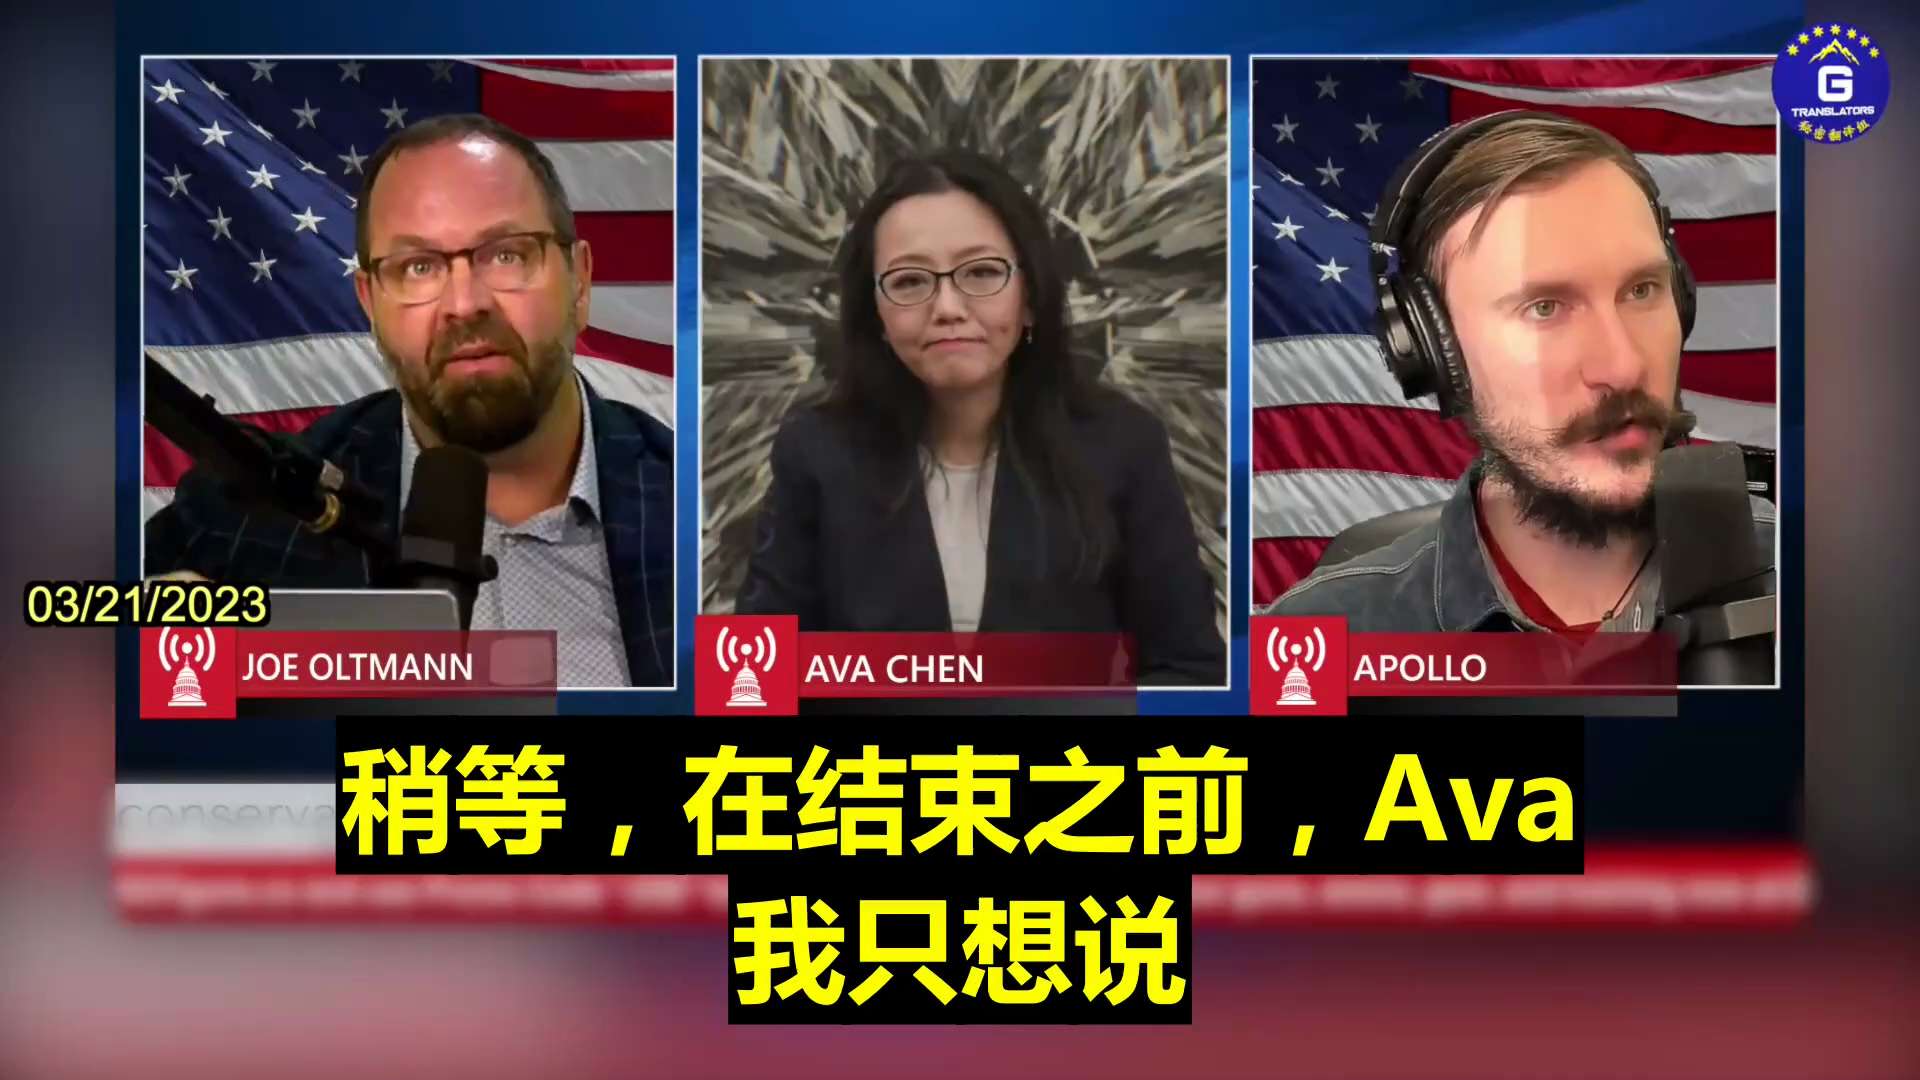 03/21/2023 During an interview on Conservative Daily Podcast, Ava Chen revealed the truth about the shutdown of GTV: The GTV platform, which was created to spread the truth since the Whistleblowers' Movement has been censored by big techs in cahoots with the Chinese Communist Party, was forced to shut down due to an SEC investigation.  03/21/2023 Ava Chen参加“保守派每日播报”(Conservative Daily)节目时，揭露GTV被关闭的真相：由于爆料革命遭到与中共沆瀣一气的大科技公司审查，所以才建立起传播真相的GTV平台，而由于证券交易委员会(SEC)的调查行动，GTV被迫关闭。